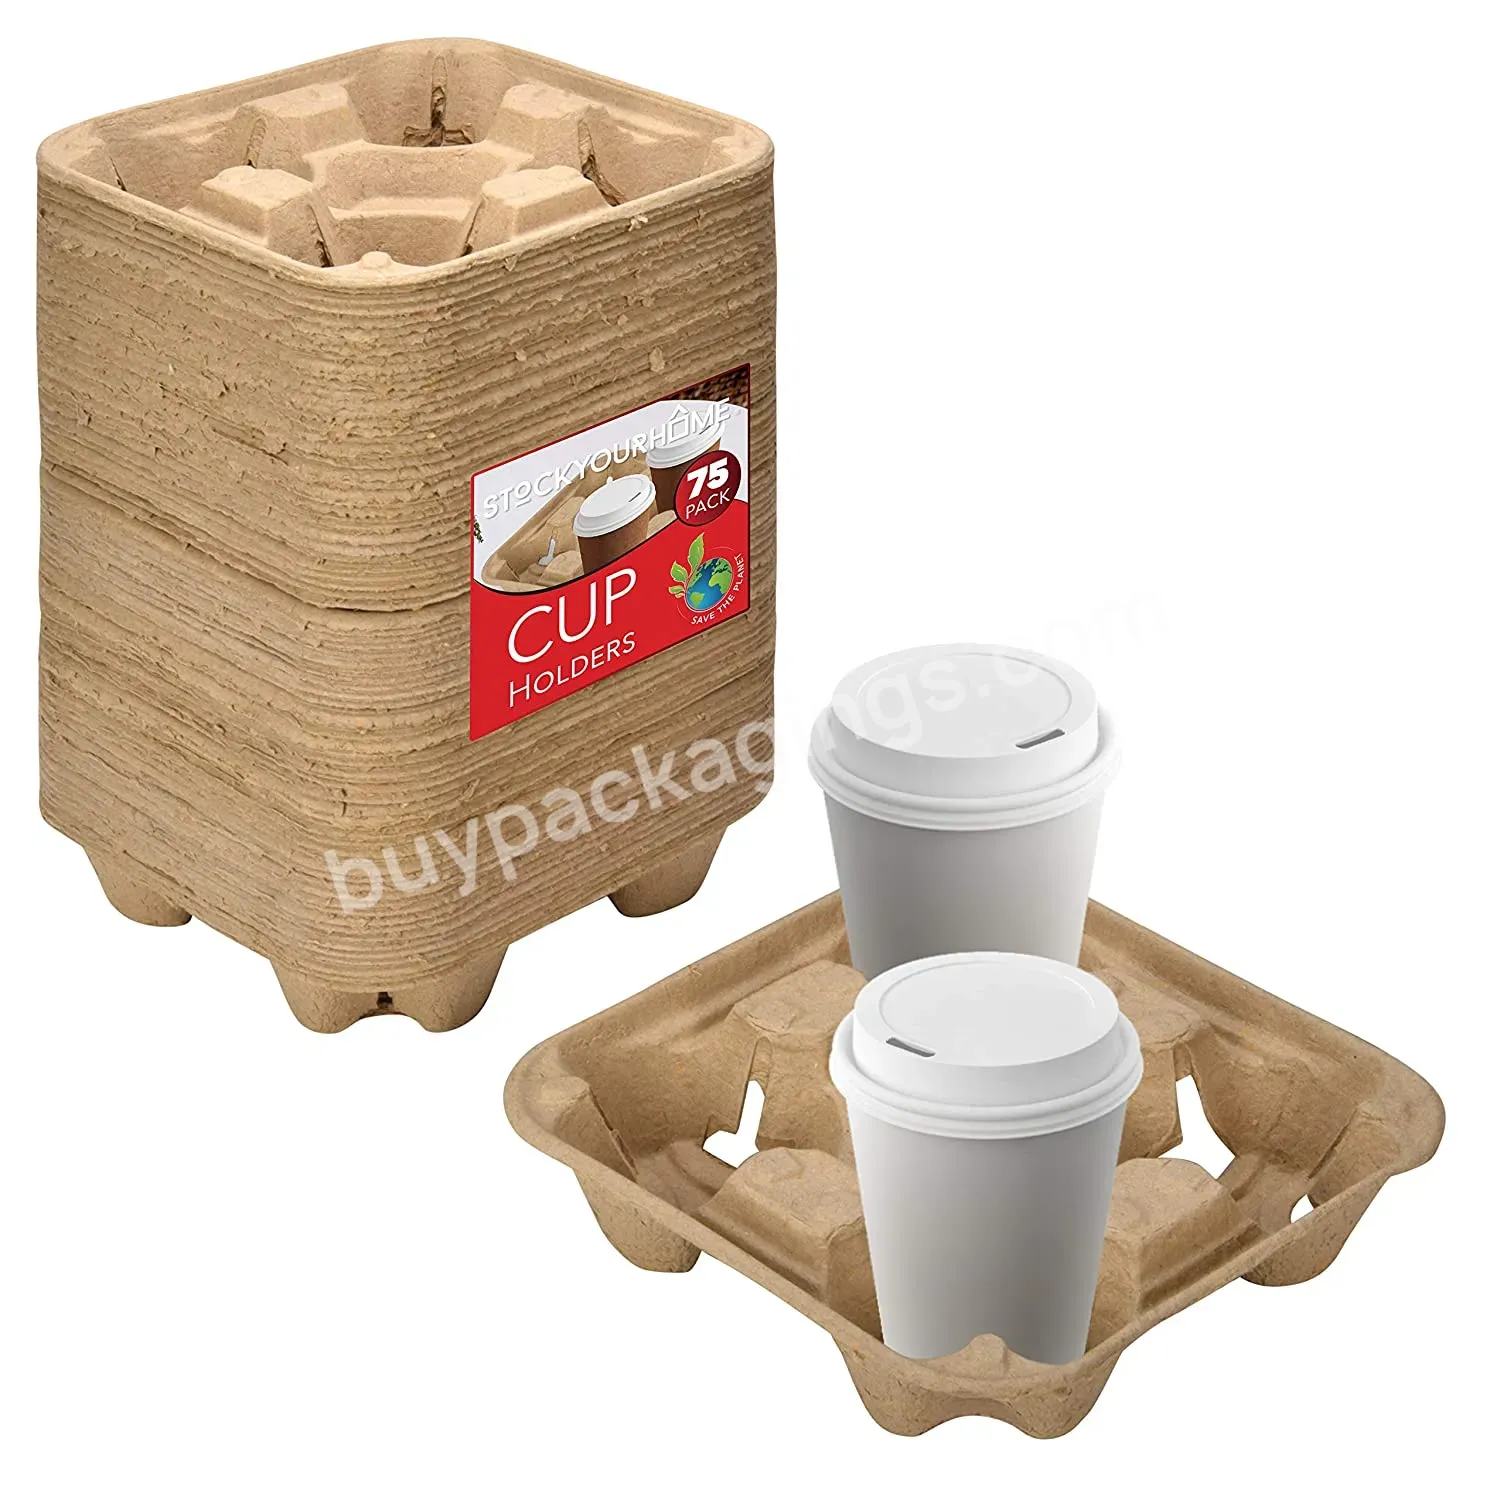 4 Cup Disposable Coffee Tray Biodegradable Cup Carrier Durable Drink Carrier For Hot Or Cold Drink Can Be Customized - Buy Rattan Cup Holders,Coffee Cup Holders,Lap Tray Cup Holder.